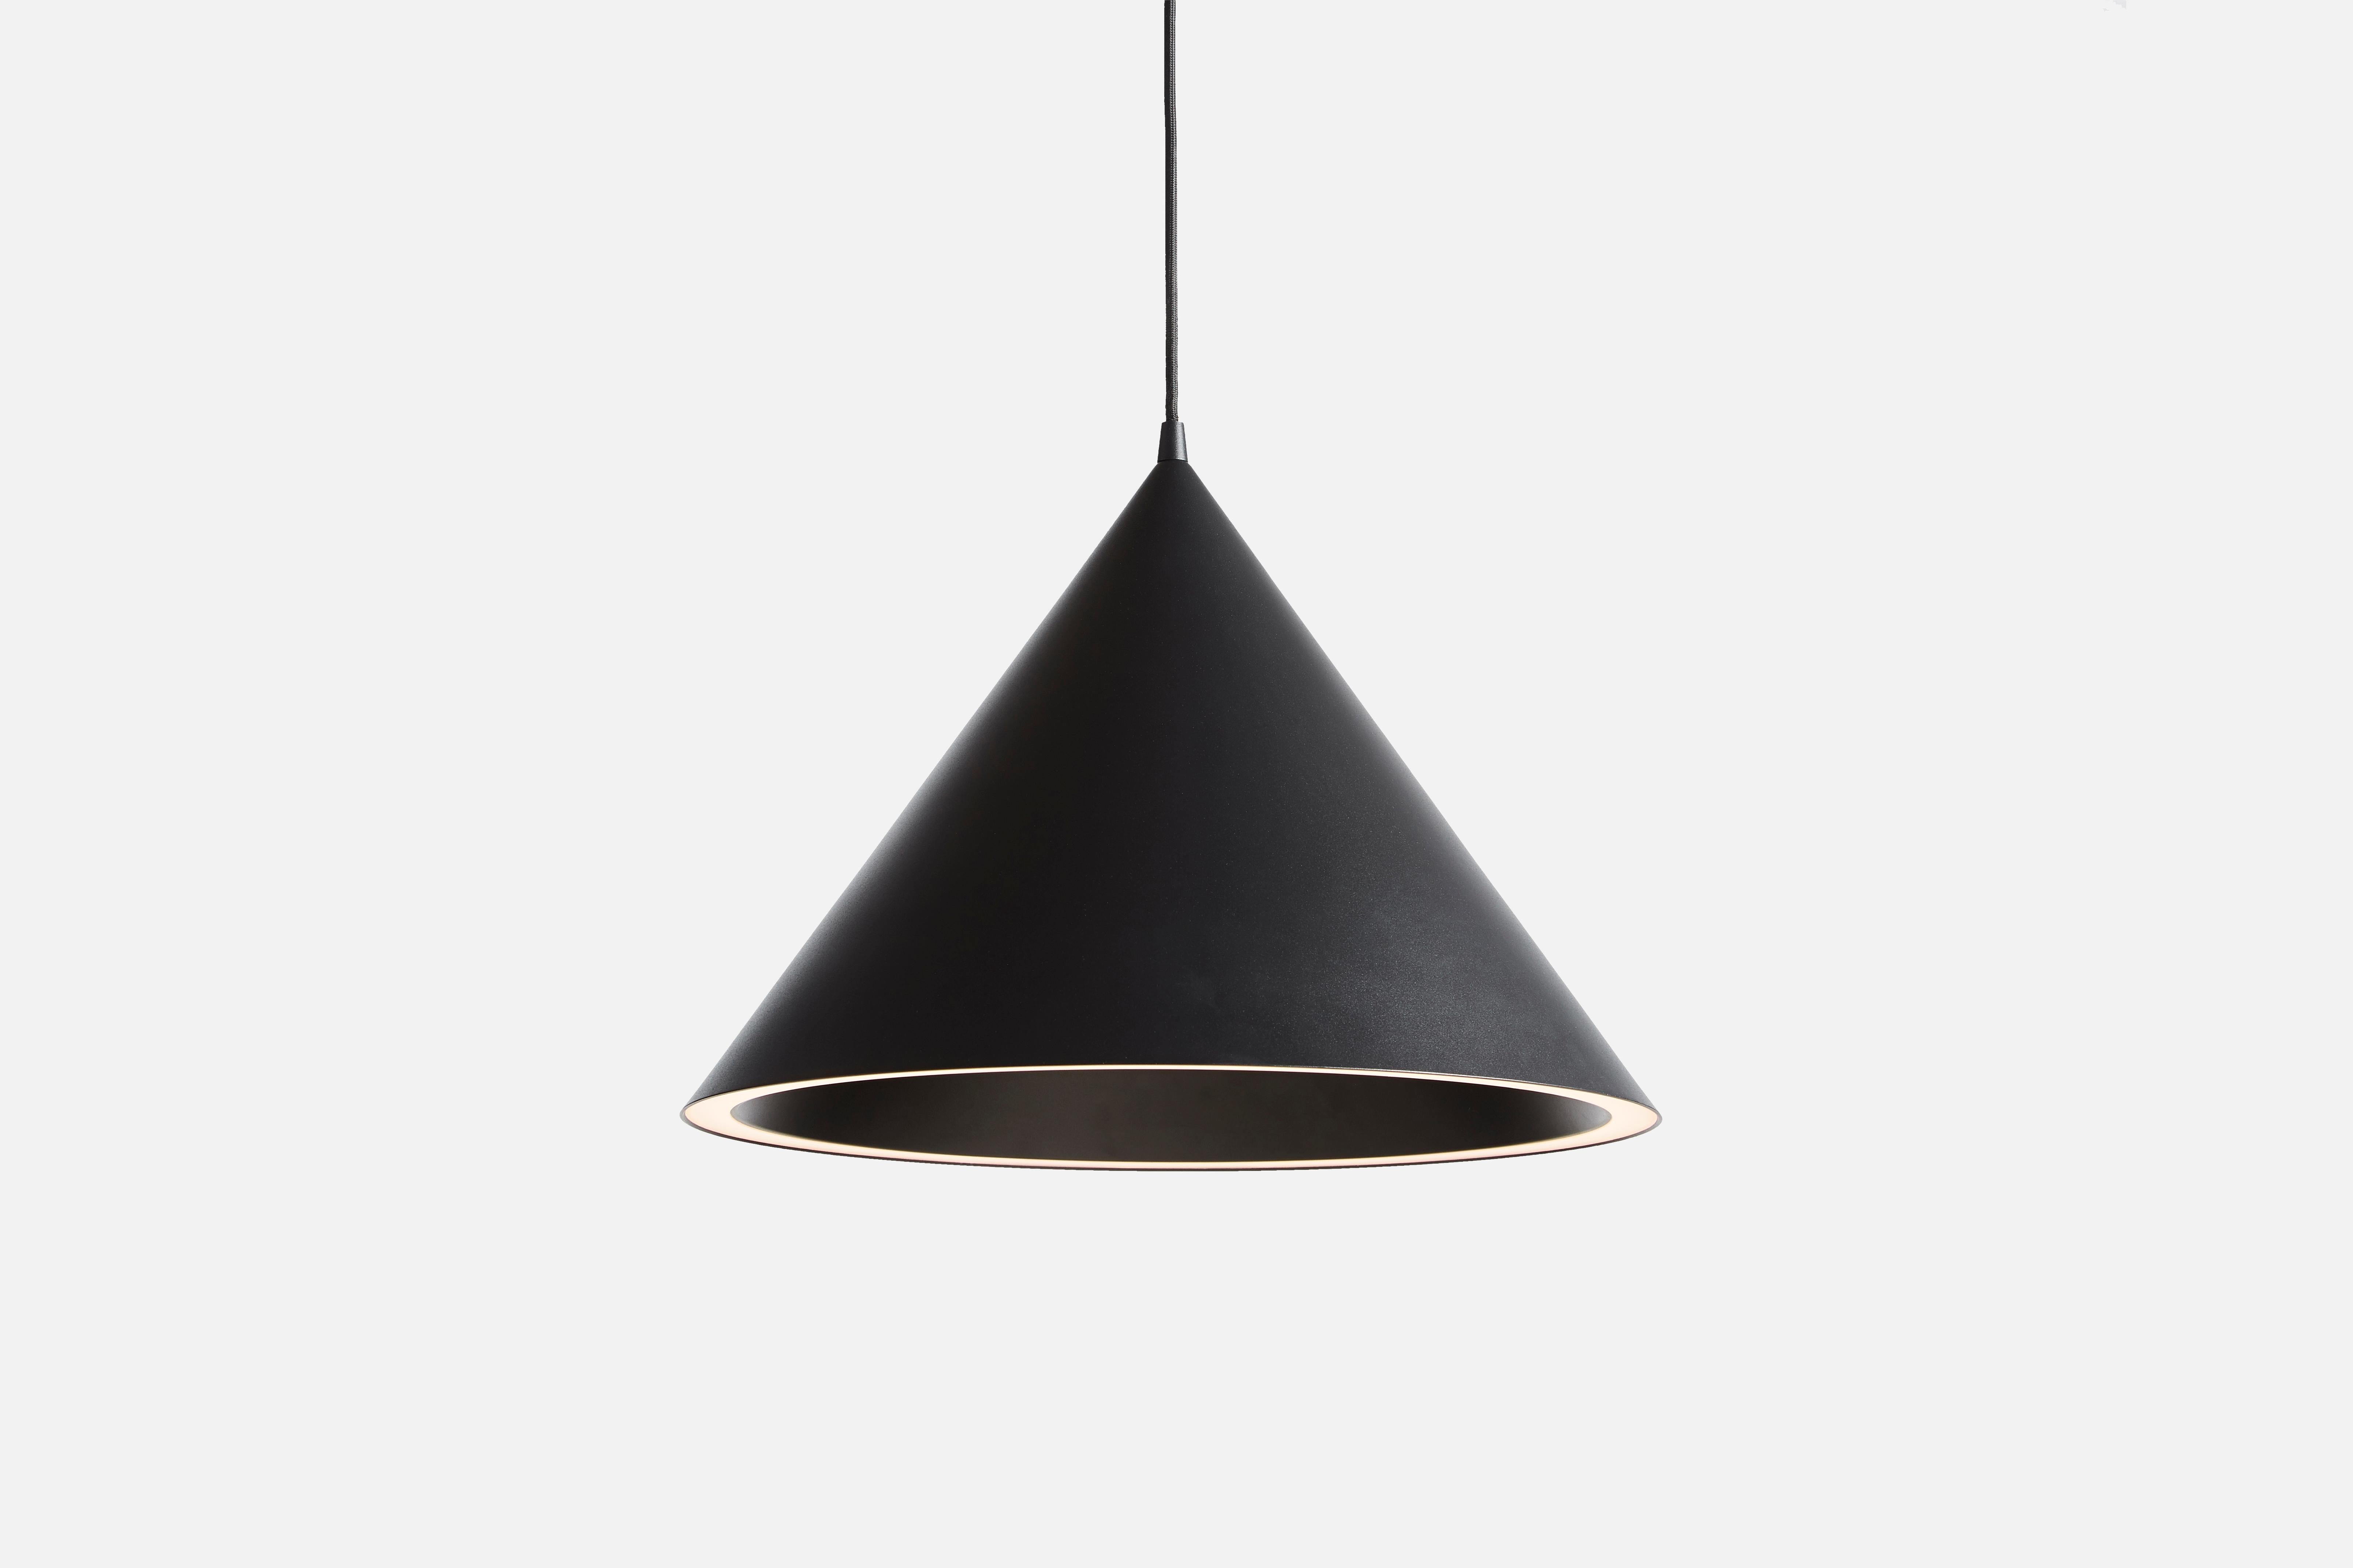 Large black Annular pendant lamp by MSDS Studio
Materials: Aluminum.
Dimensions: D 46.8 x H 32.4 cm
Available in white or black.
Available in 2 sizes: D32, D46.8 cm.

MSDS STUDIO is a successful Canadian design studio that works in interior,